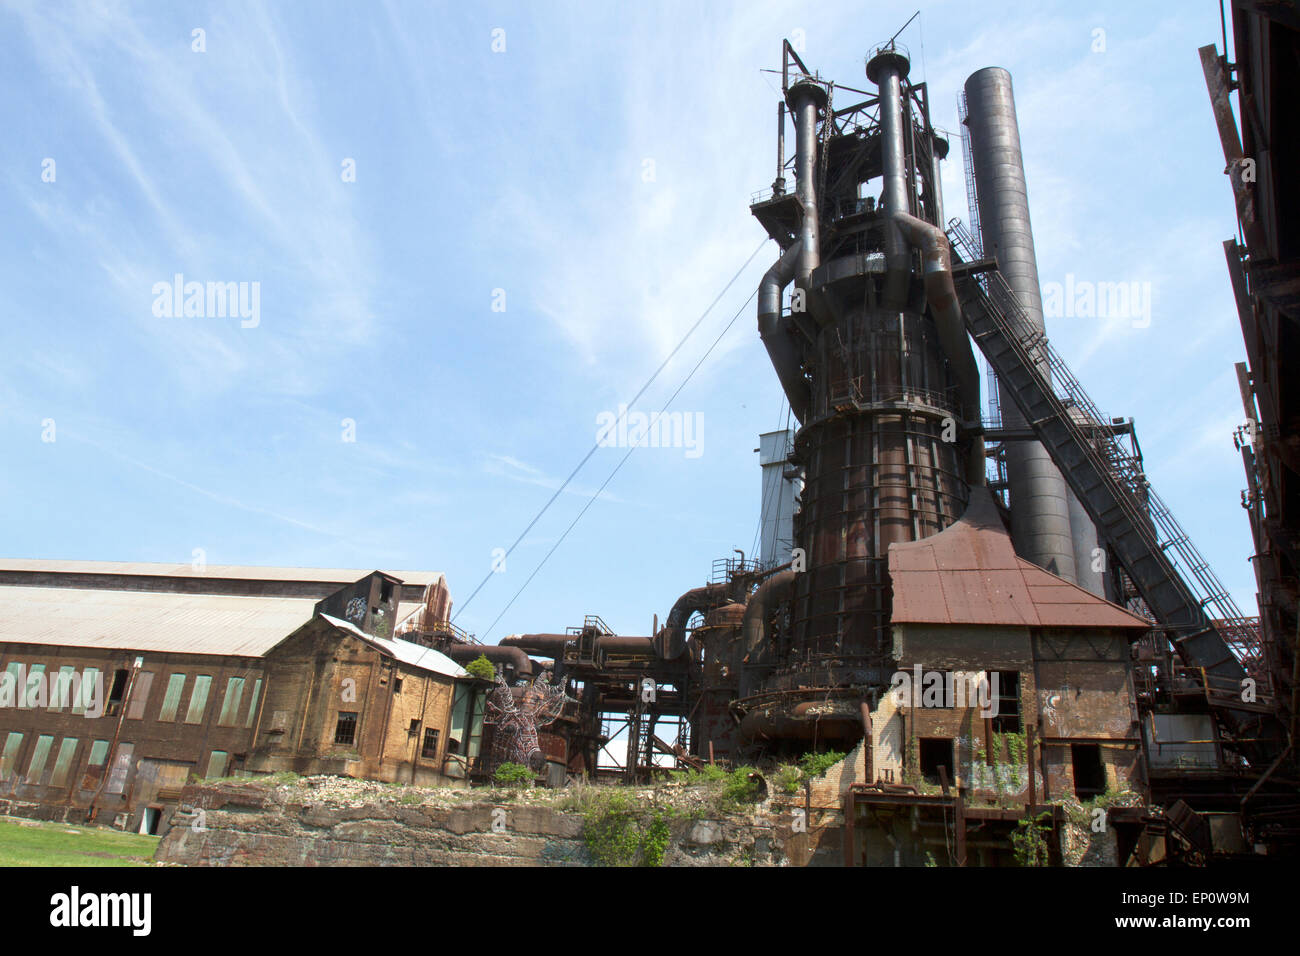 Blast furnace and factory structures in abandoned steel mill. Stock Photo